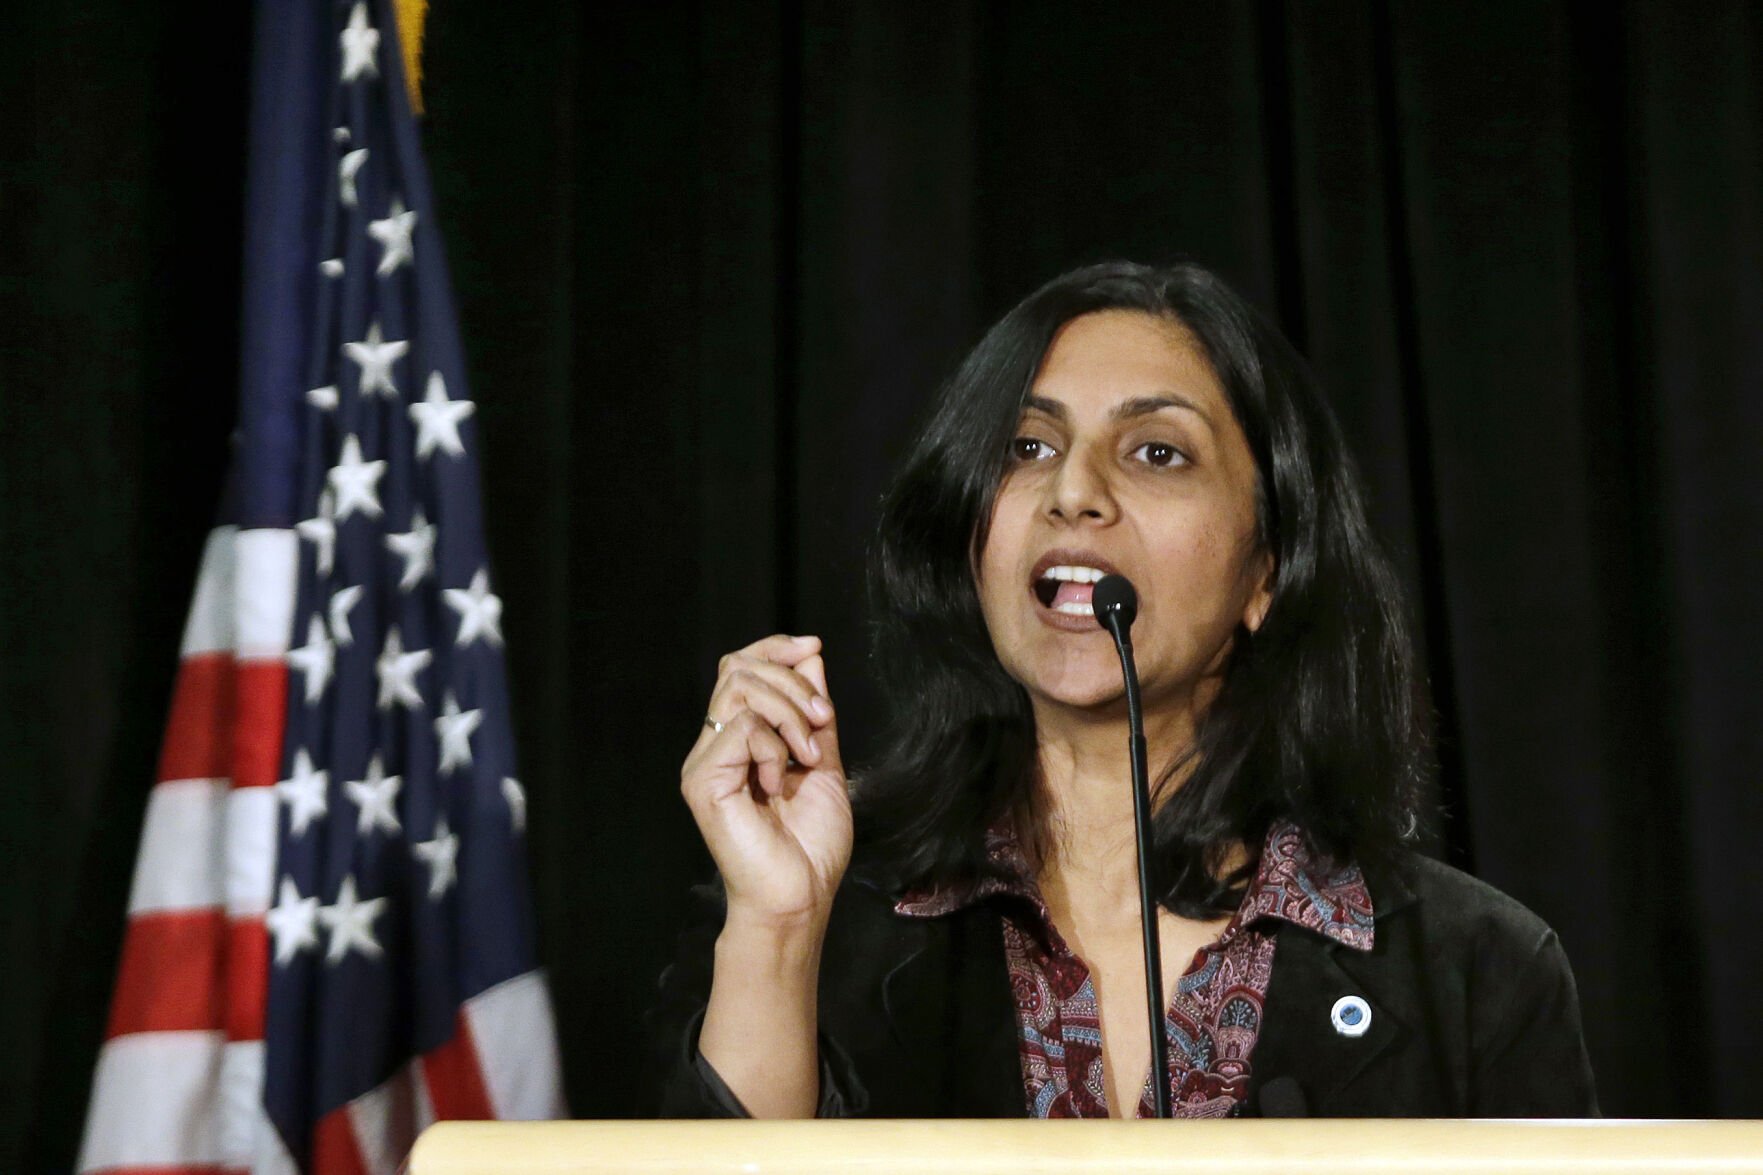 <p>FILE - New Seattle City Councilmember Kshama Sawant speaks during an inauguration ceremony for city officials Monday, Jan. 6, 2014, in Seattle. One of Sawant’s earliest memories of the caste system was hearing her grandfather – a man she “otherwise loved very much” – utter a slur to summon their lower-caste maid. Now an elected official in a city thousands of miles from India, she has proposed an ordinance to add caste to Seattle’s anti-discrimination laws. (AP Photo/Elaine Thompson, File)</p>   PHOTO CREDIT: Elaine Thompson 